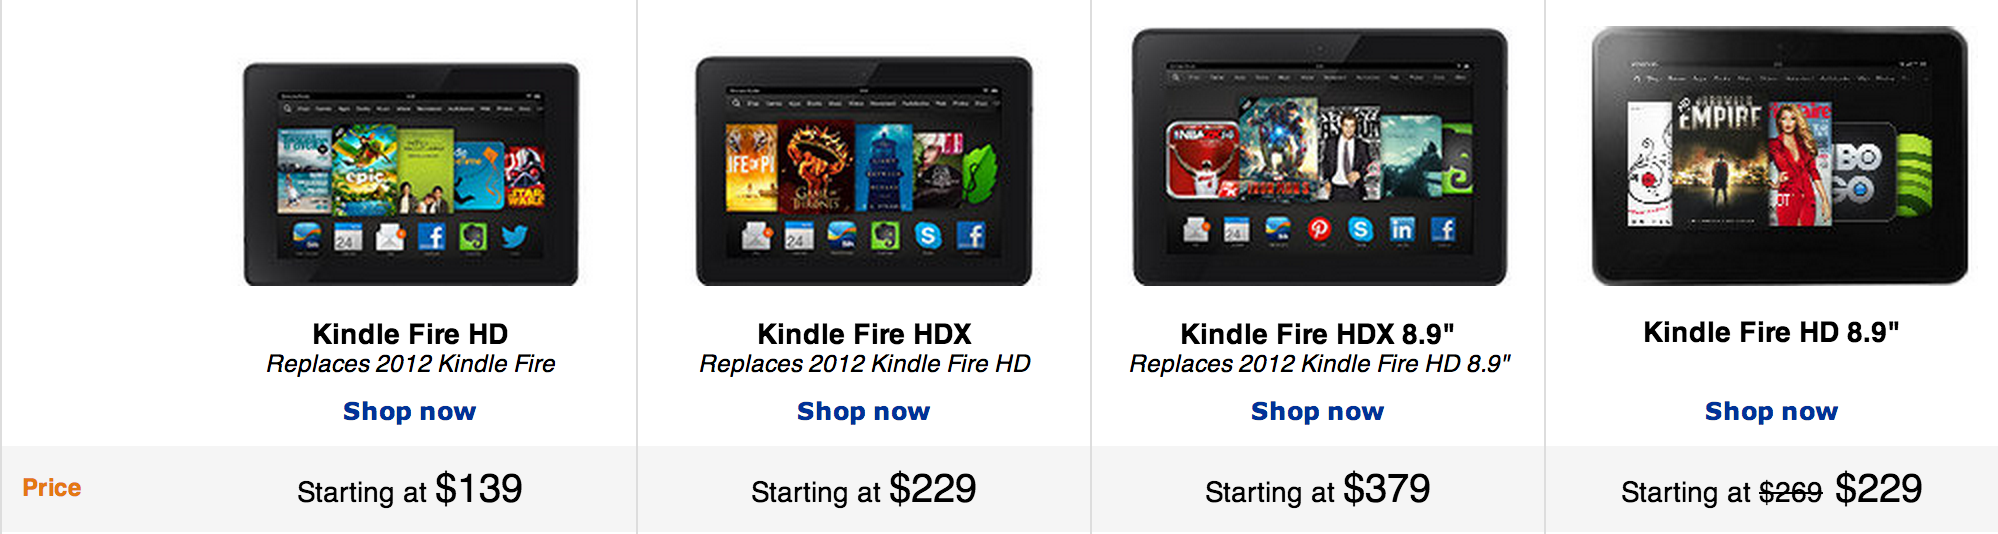 kindle_fire.png